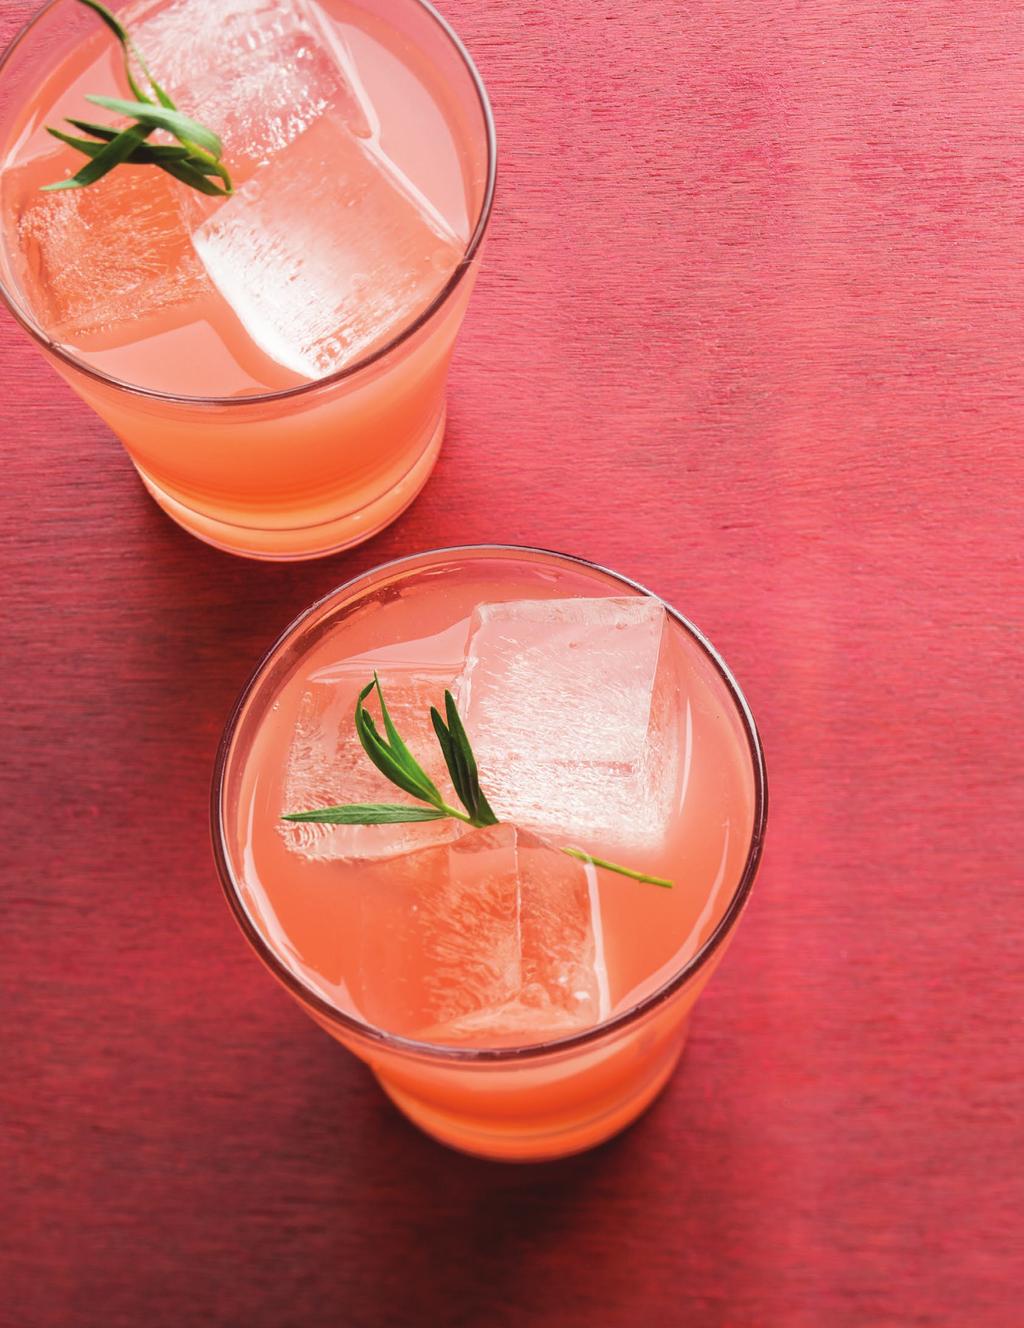 ONE DAY IN RIO Forget the beaches of Brazil as the summer heat beats down, Phoenix-based bartender Stephanie Teslar keeps cool with a breezy mix of caçhaca, blanco tequila and tangy watermelon